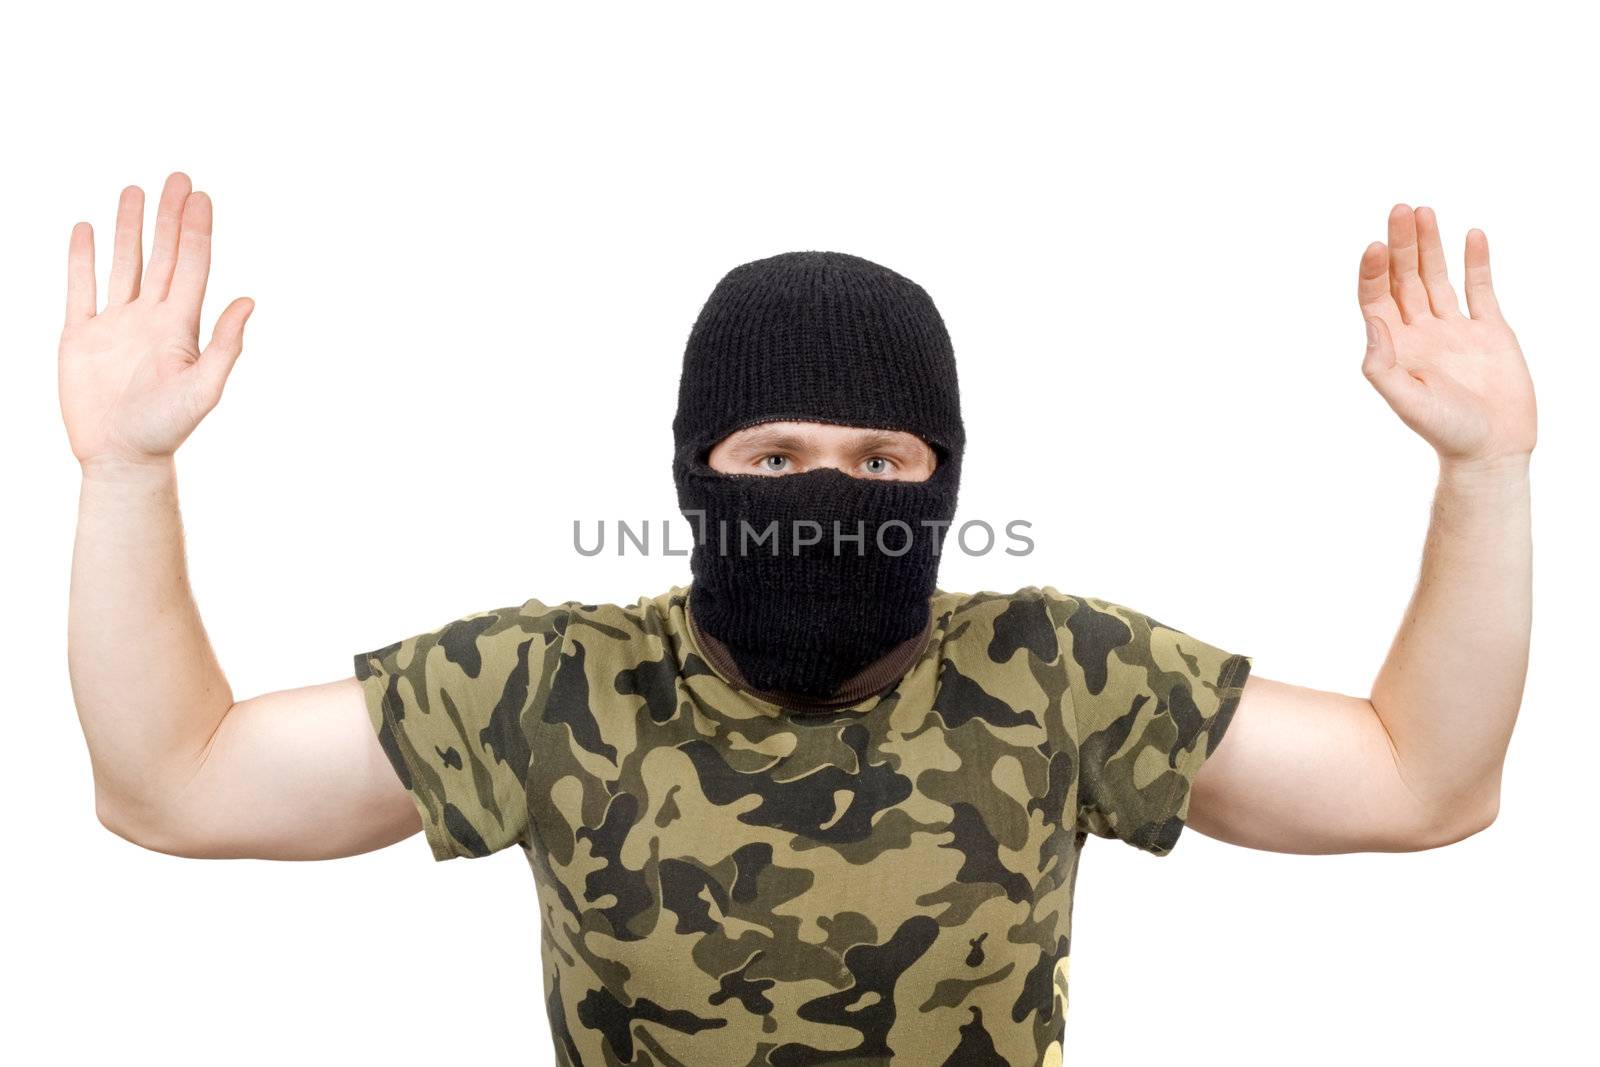 The surrendered criminal in a black mask over white